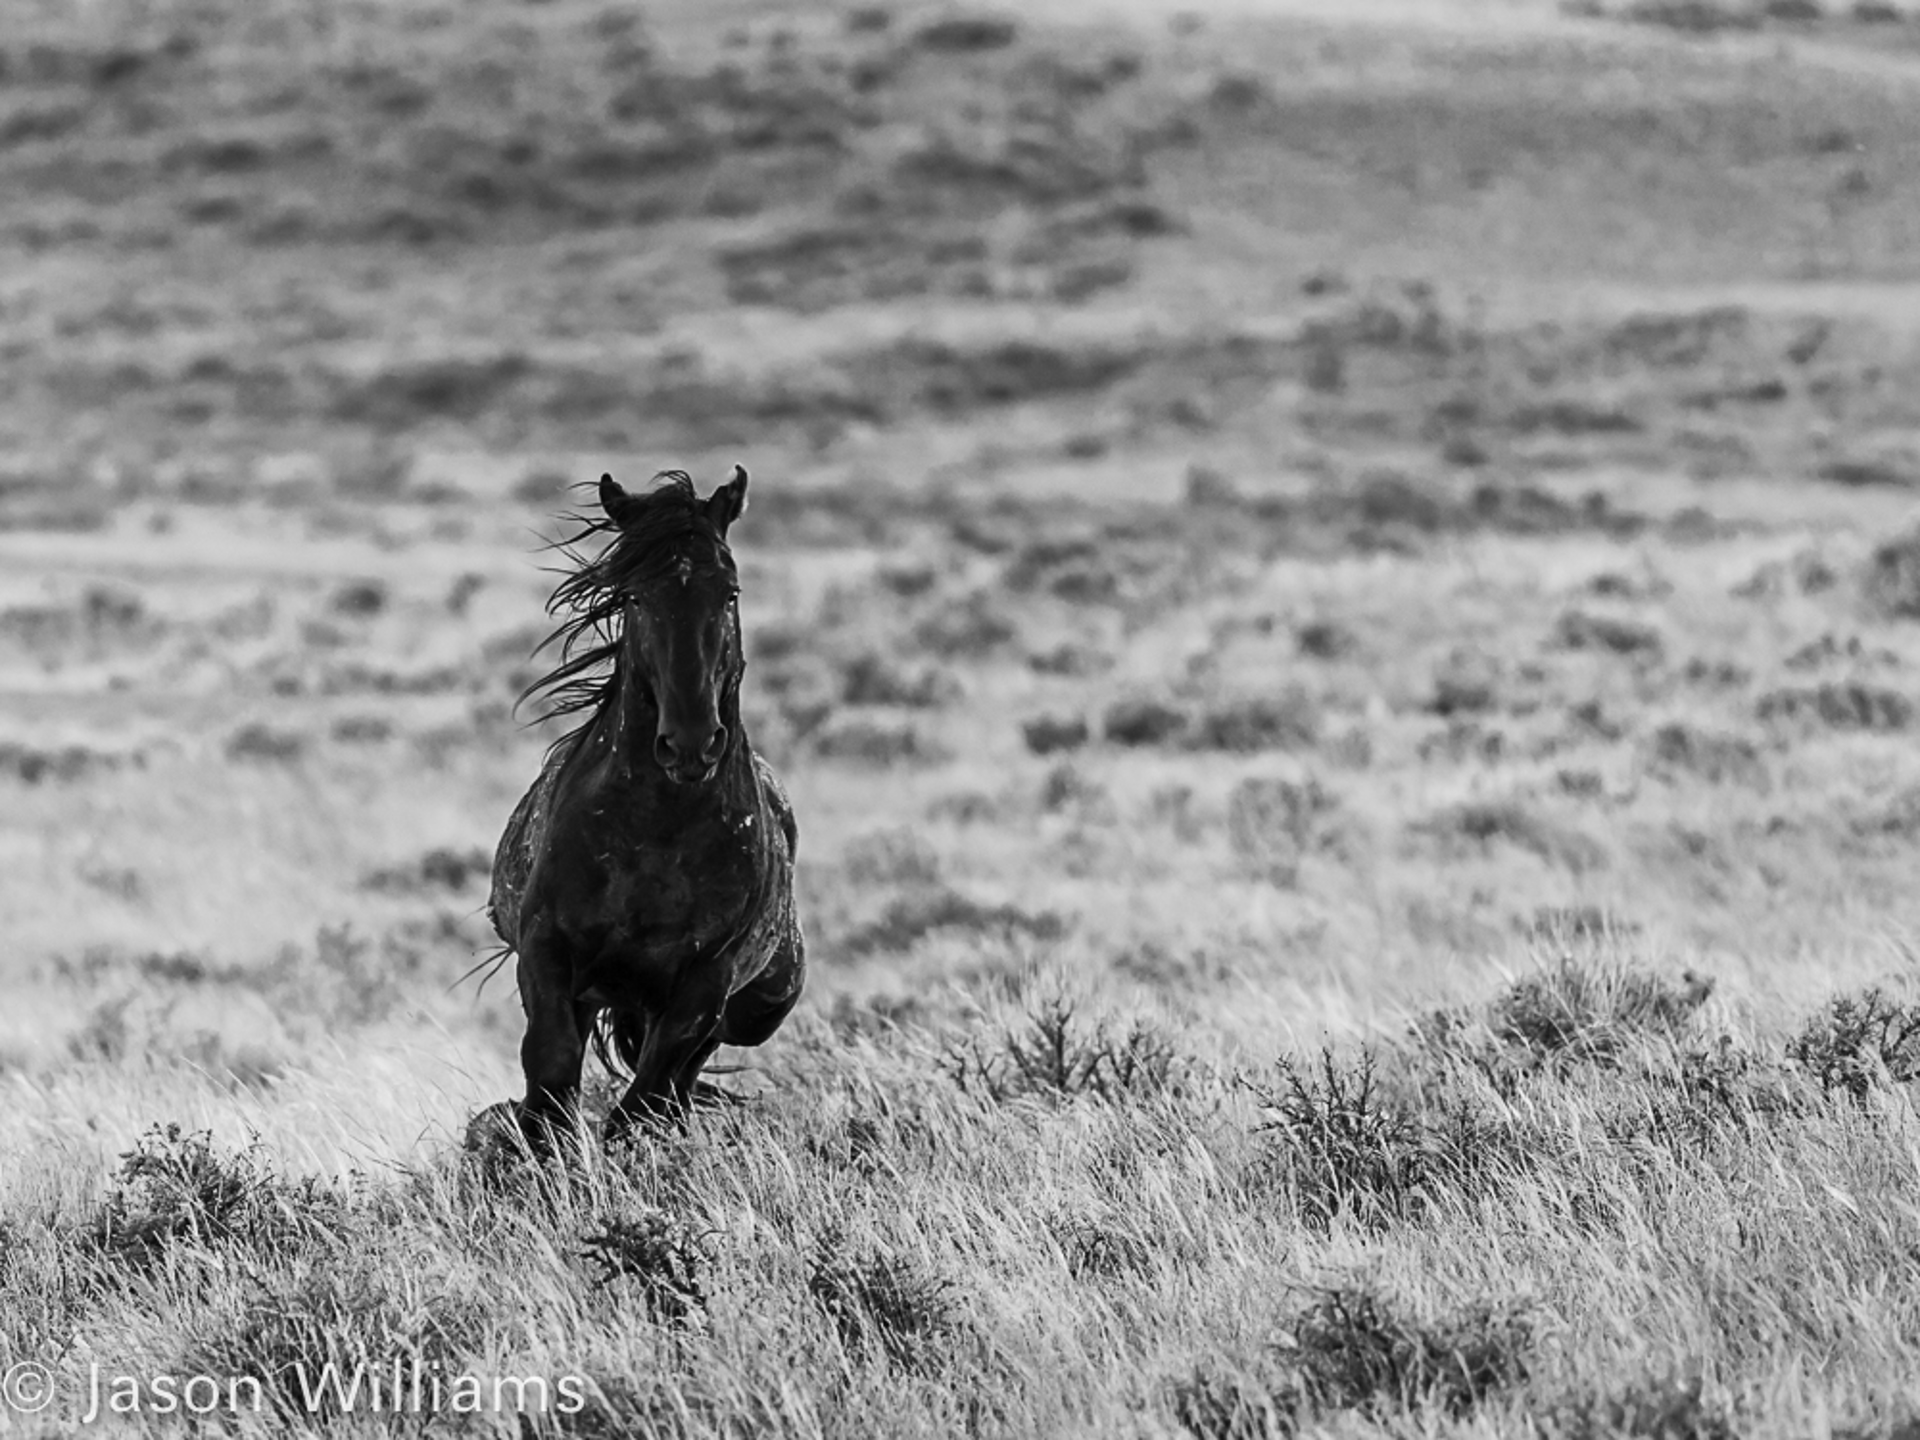 Wild Mustang Dramatically Running In Grassy Plains, Black And White Wildlife Photography on Acid Free Hahnemule Bamboo, By Jason Williams